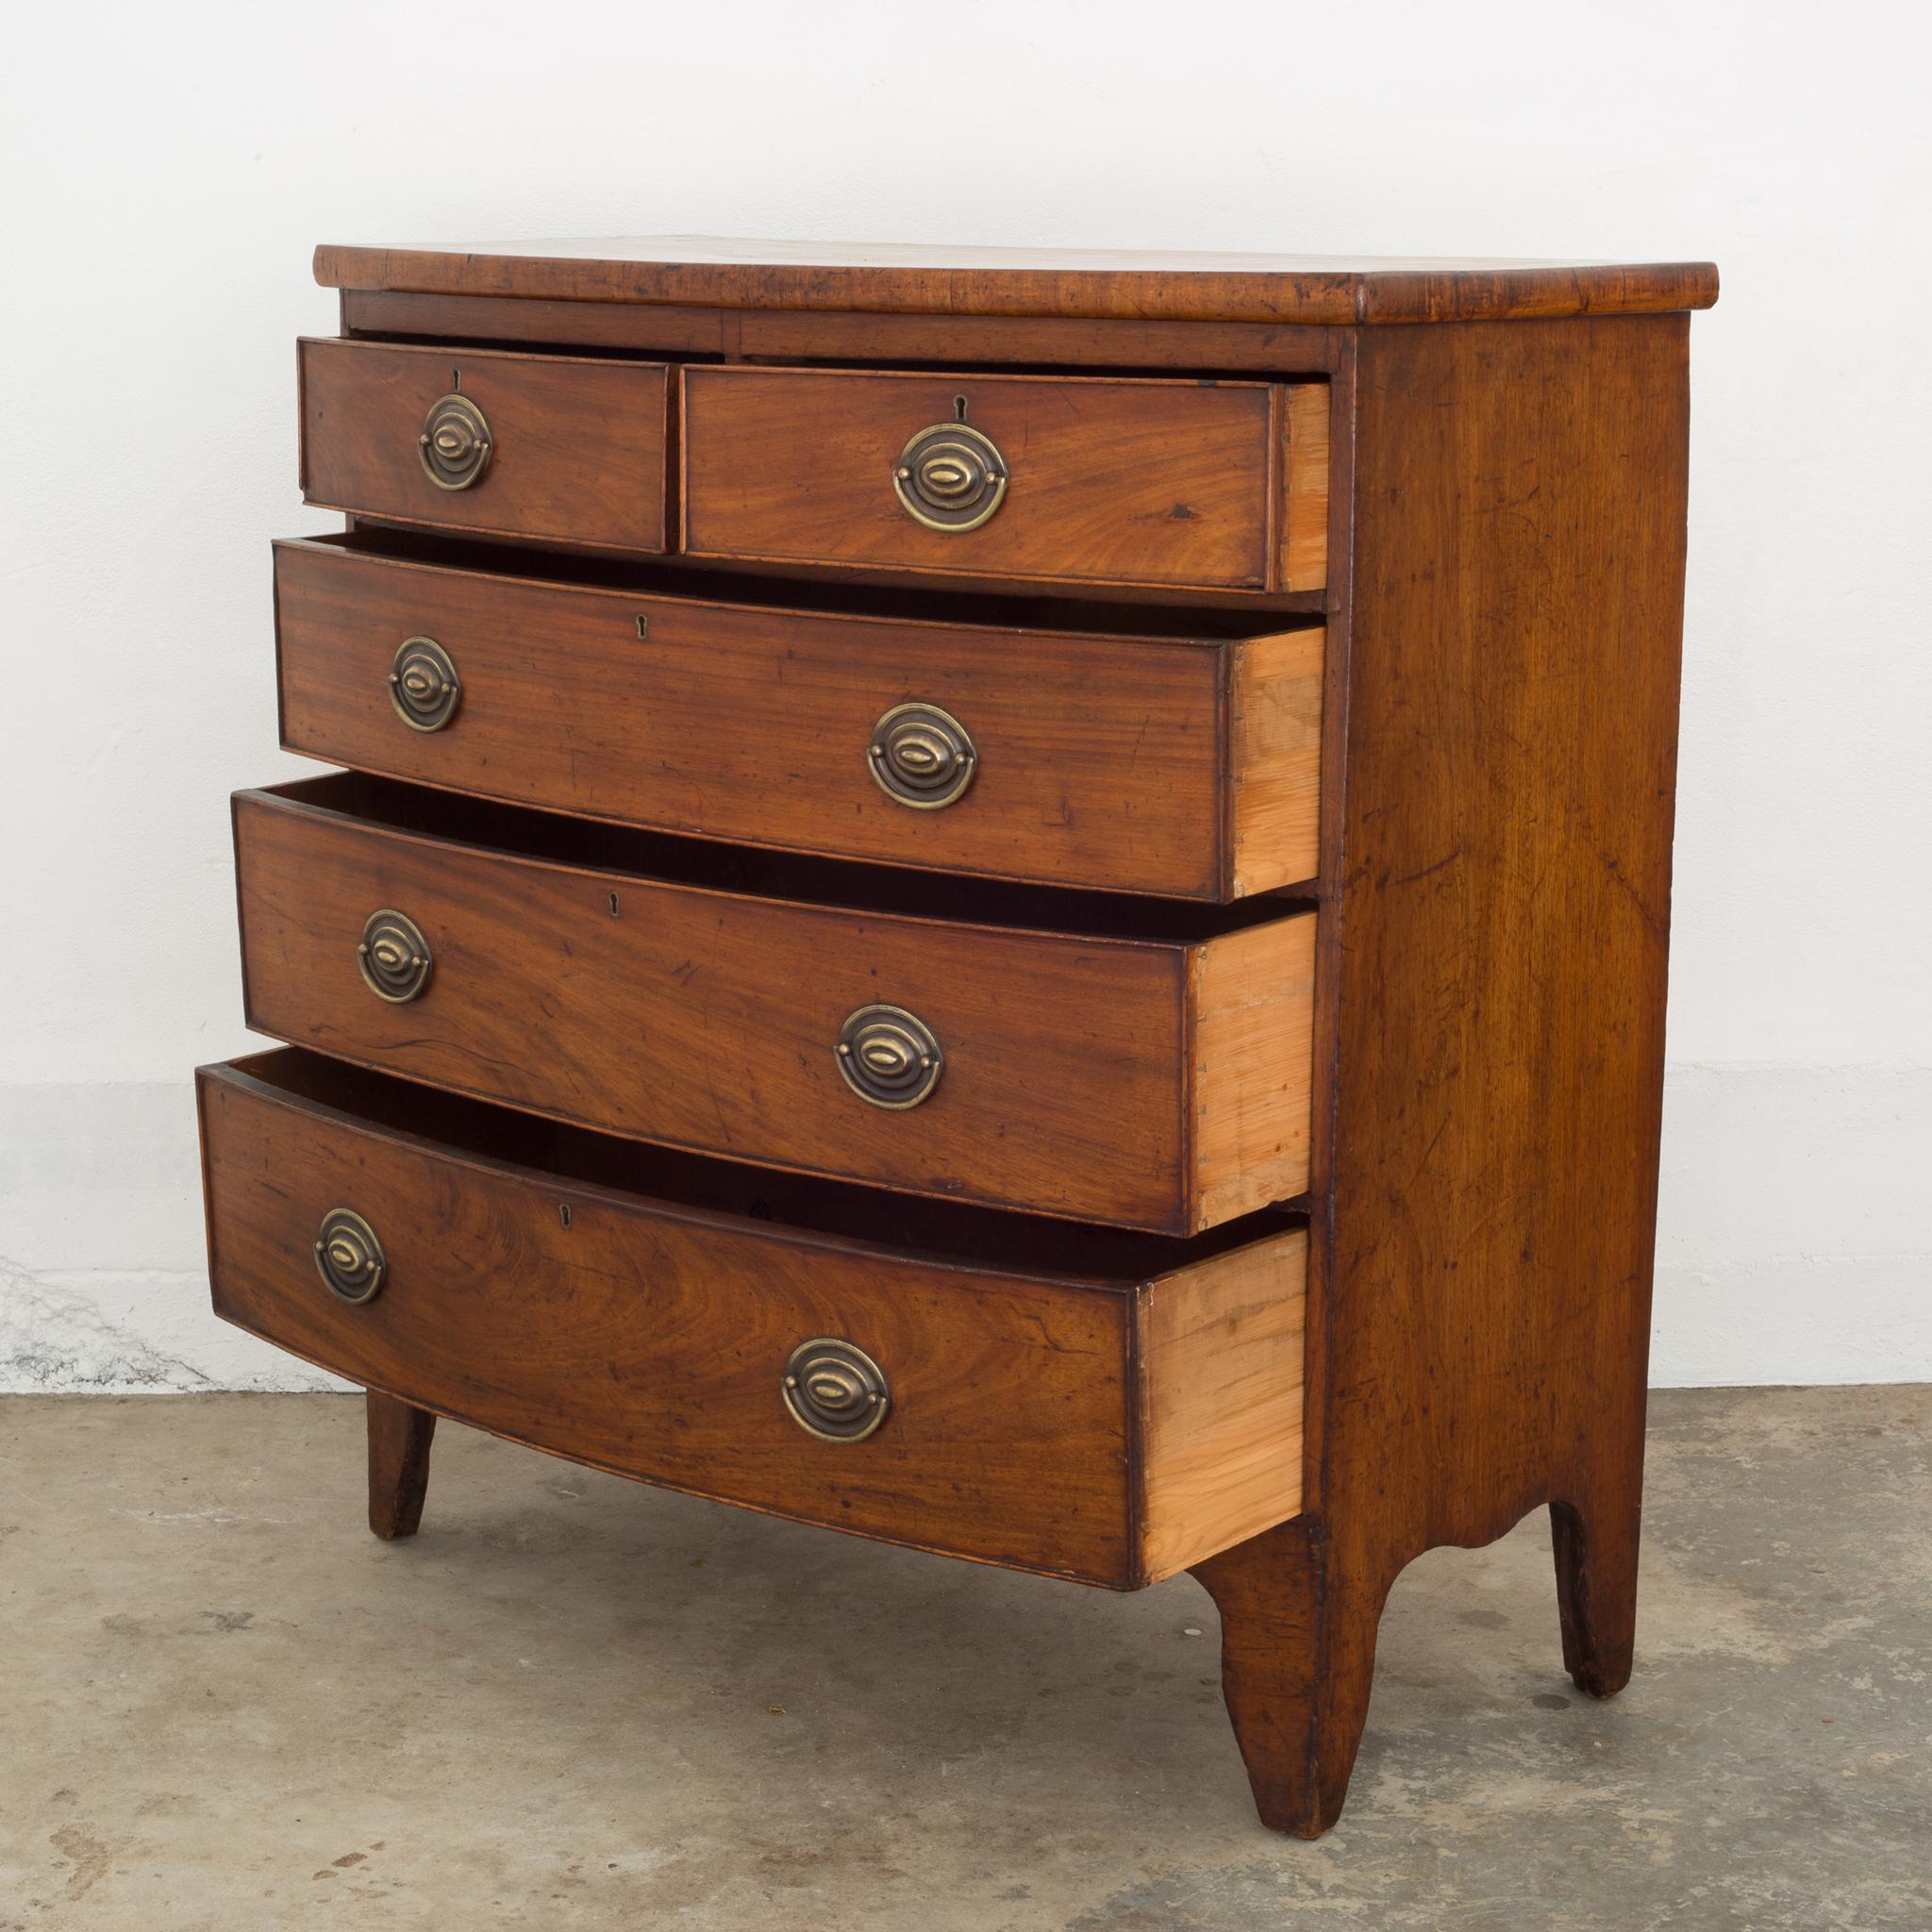 About
An antique bow front chest with original brass pulls and key holes. (No keys available.) The chest features French bracket feet and dovetails joints on all the drawers.

Creator: Unknown.
Date of manufacture: circa 1780-1790.
Materials